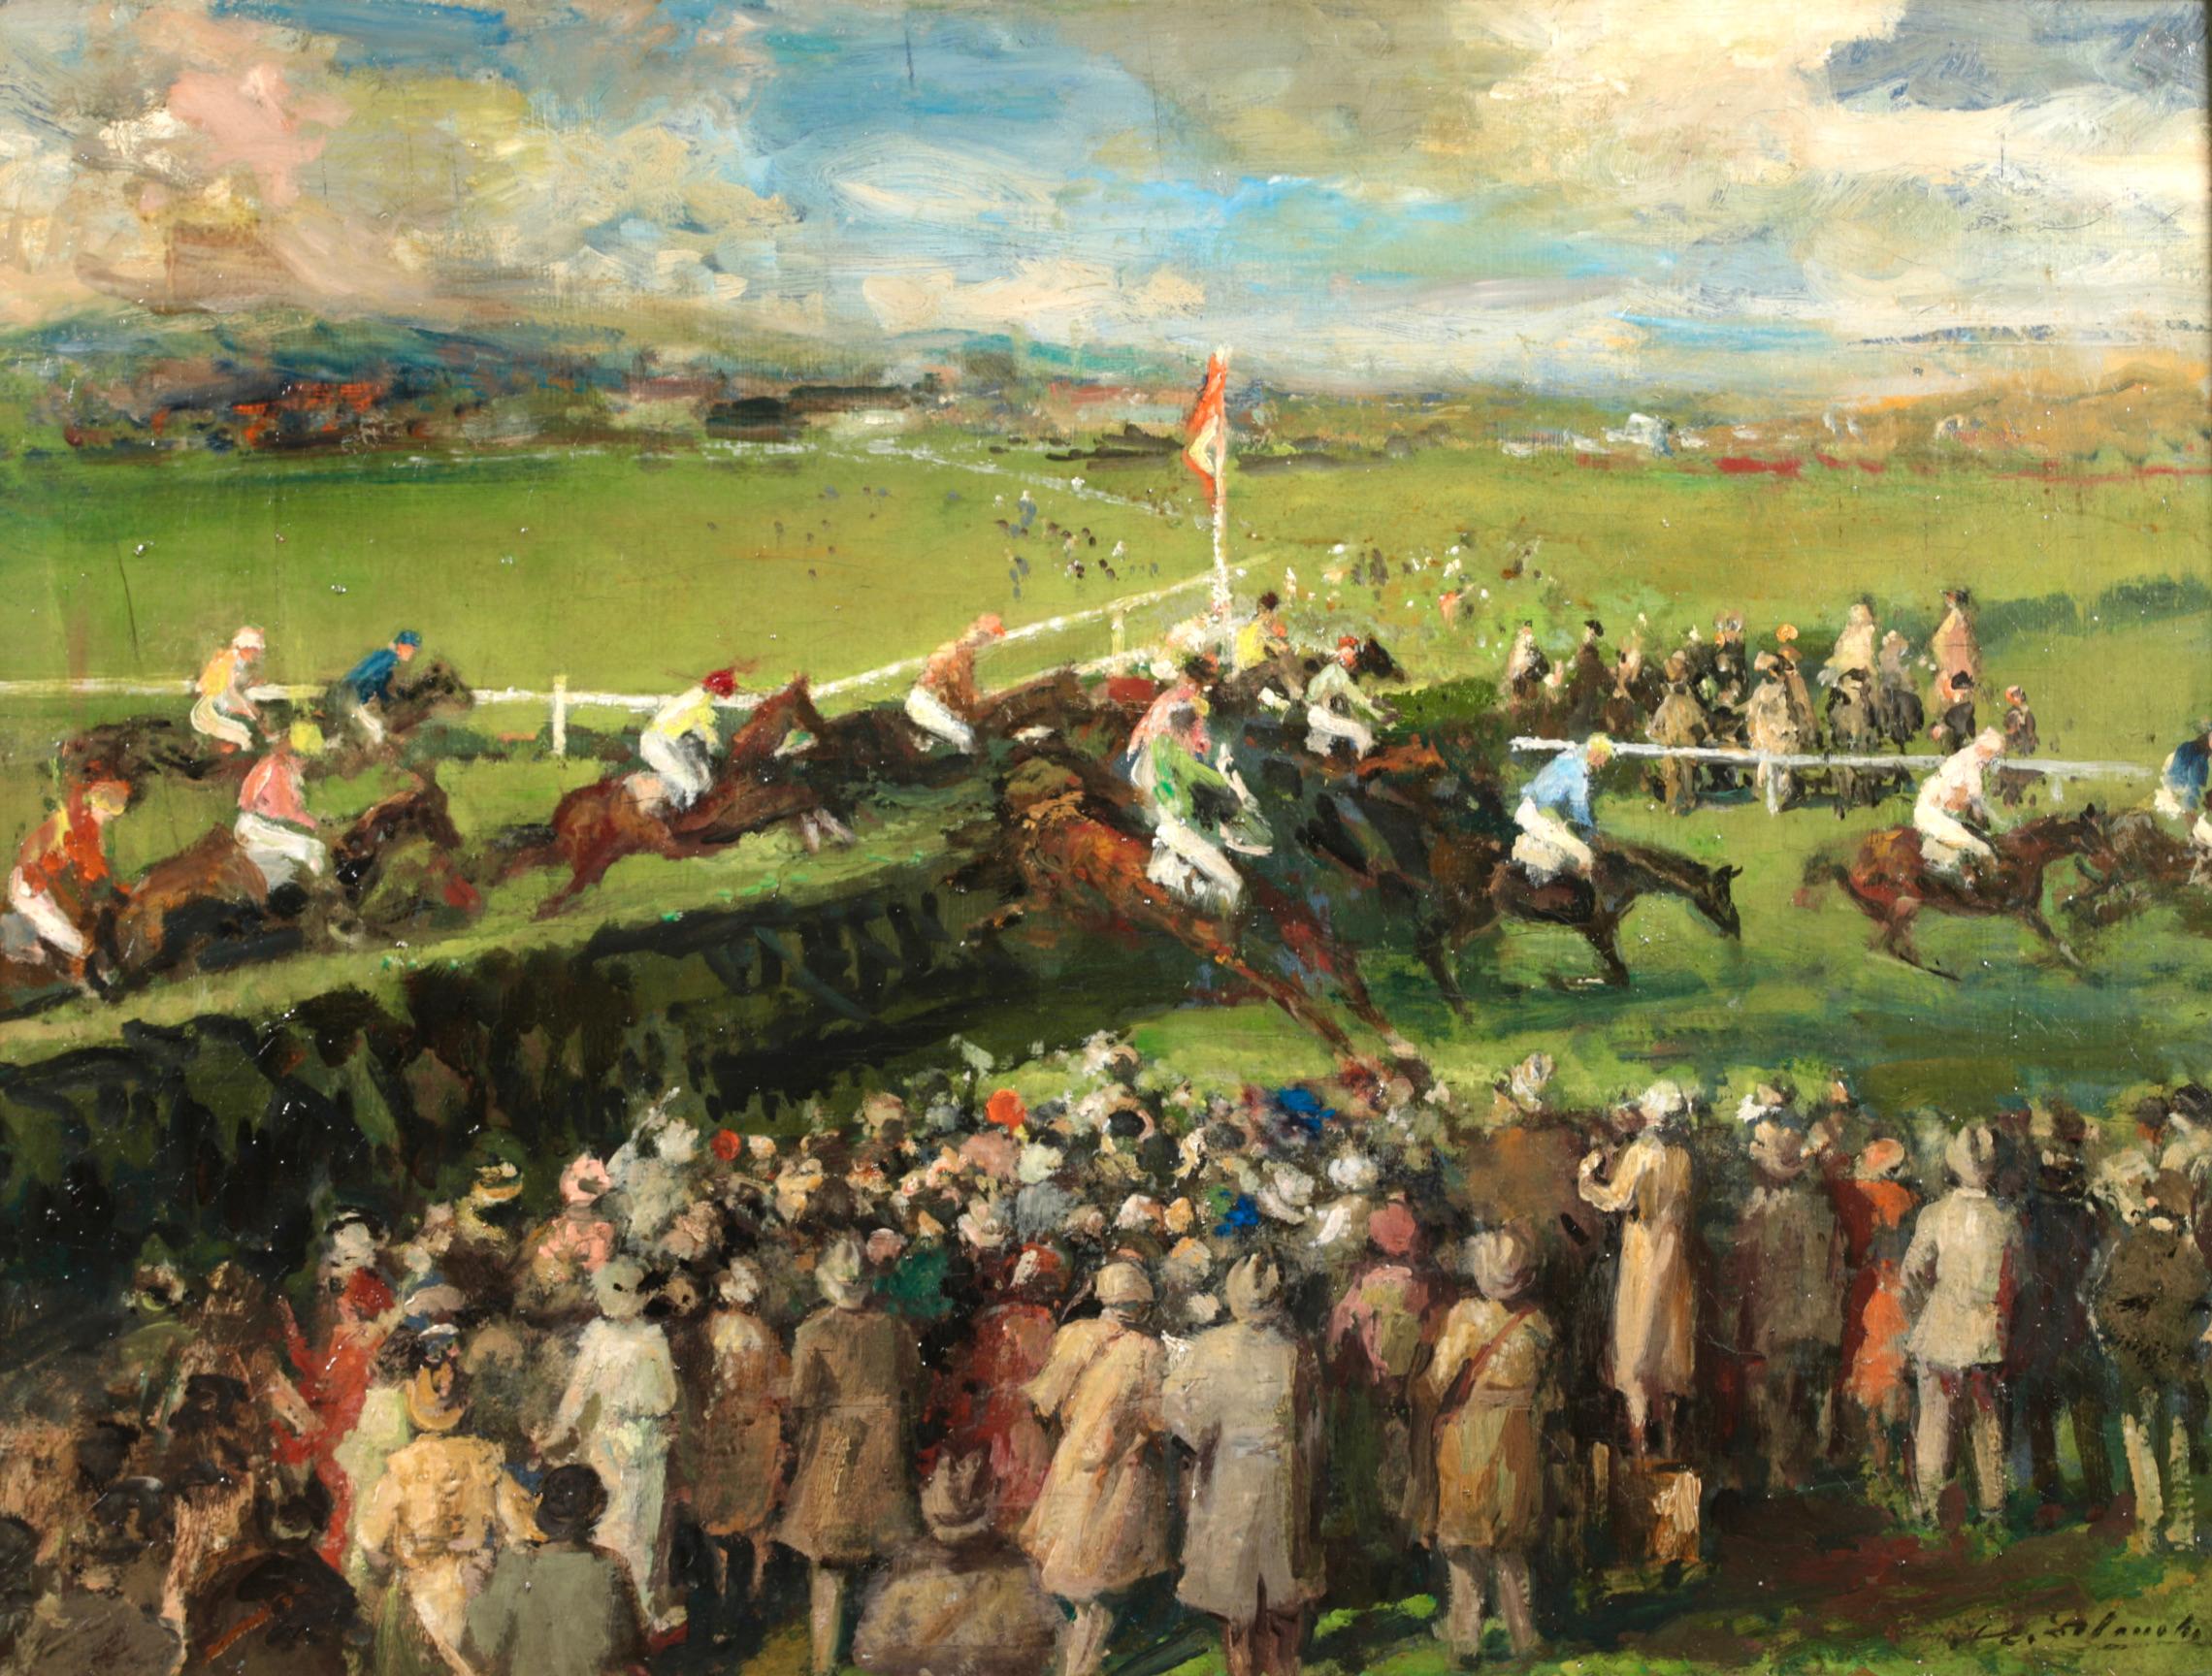 At the Races - Post Impressionist Horses & Figures Oil by Jacques-Emile Blanche - Painting by Jacques Emile Blanche